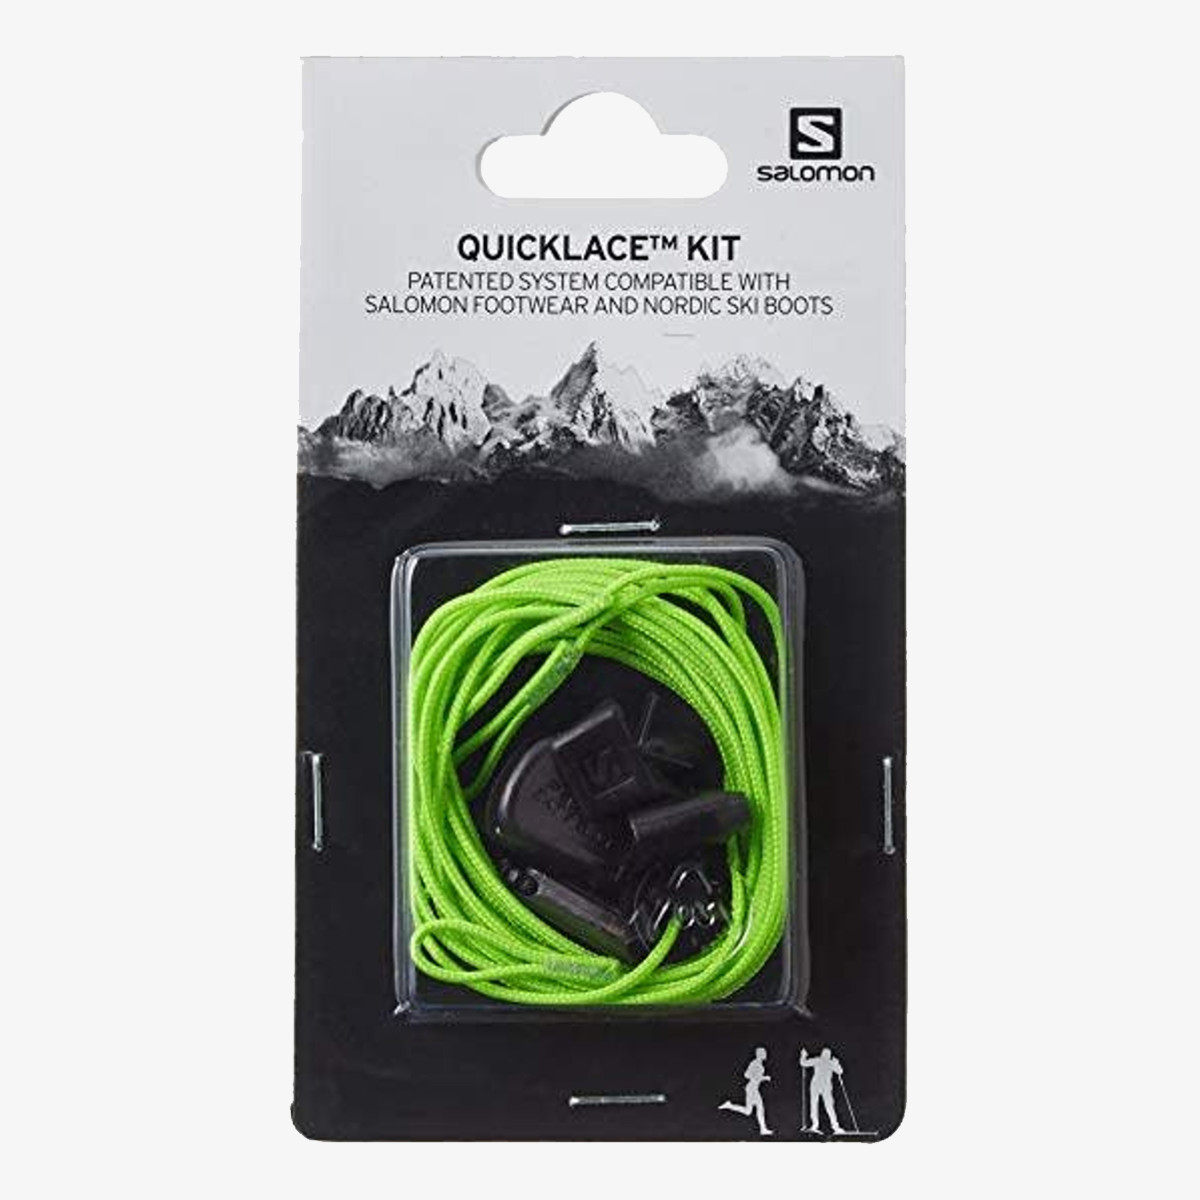 QUICKLACE KIT 